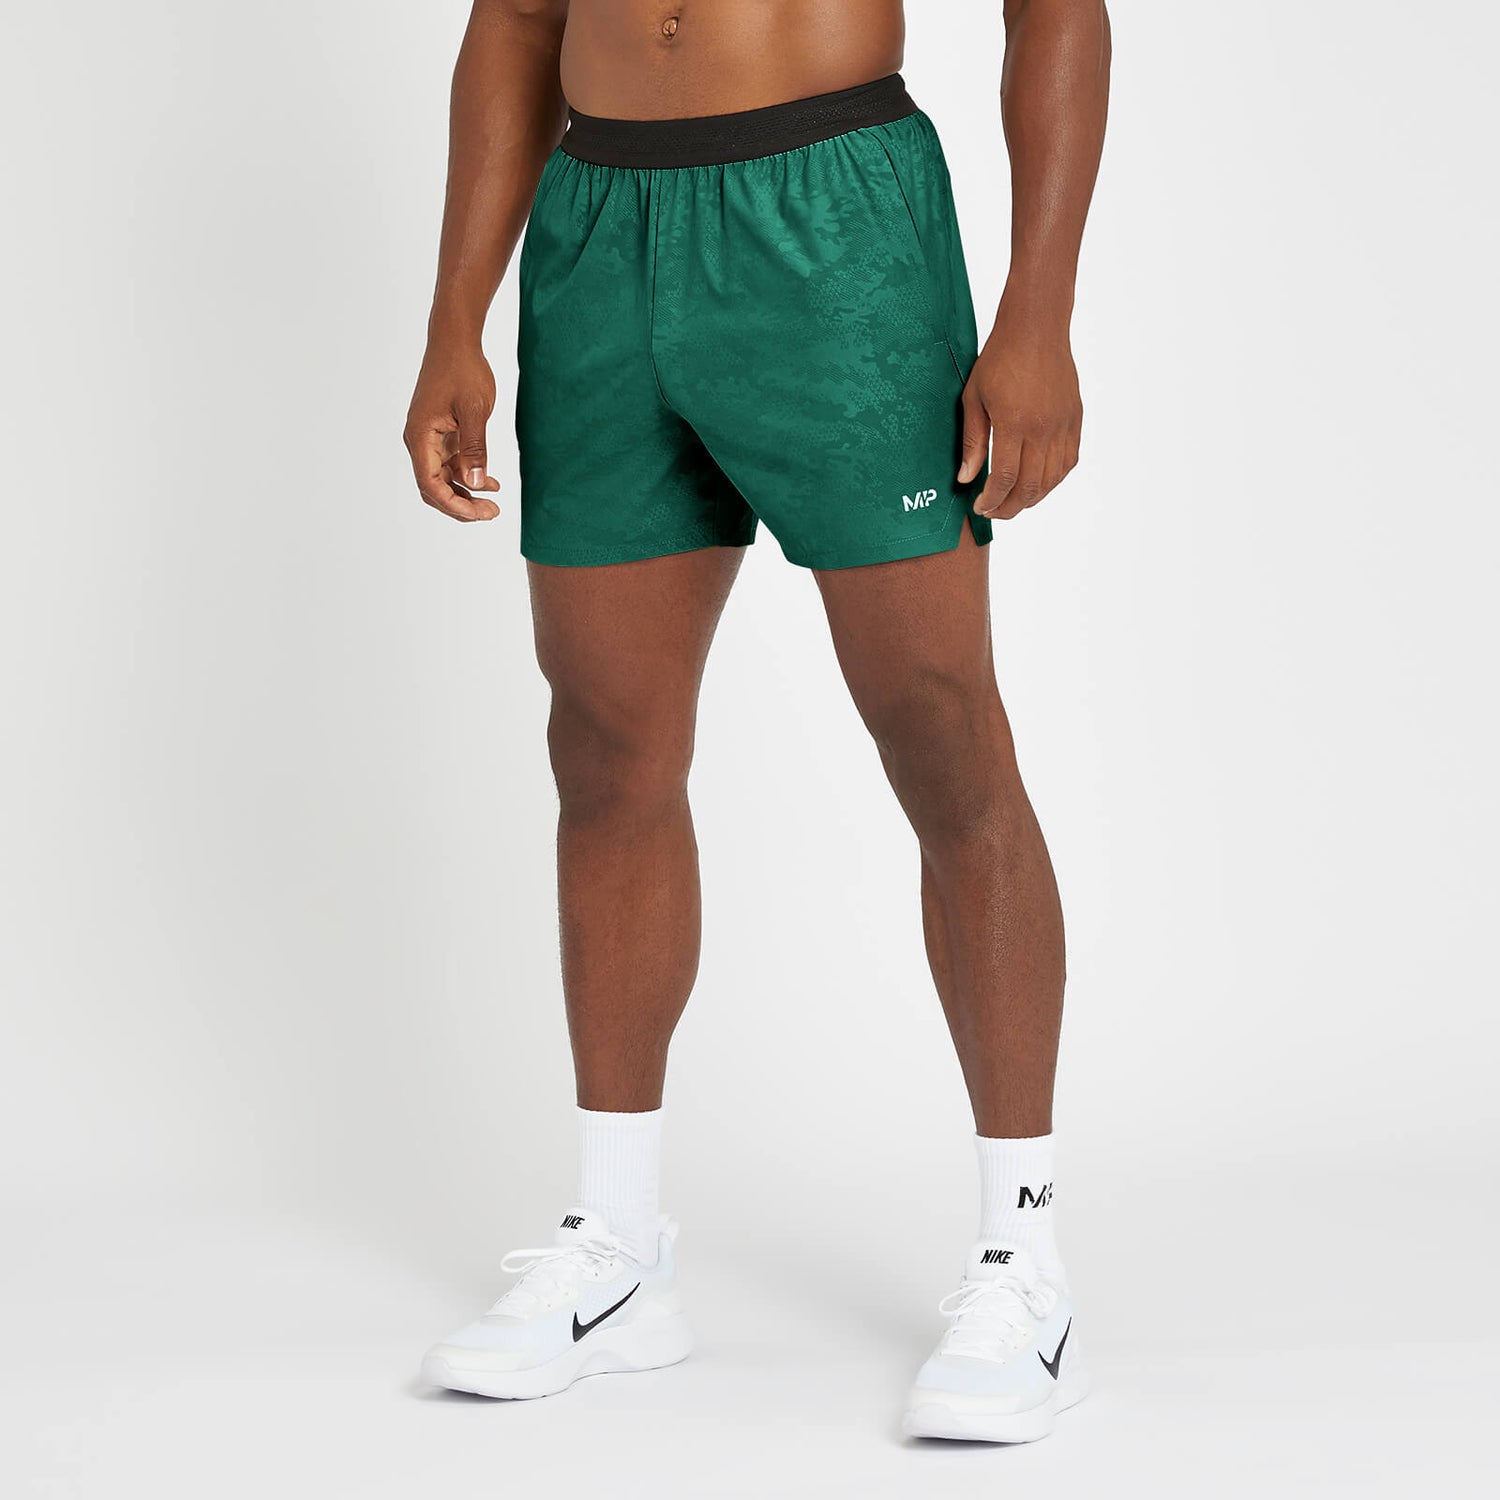 Limited Edition MP Men's Engage Shorts - Pine